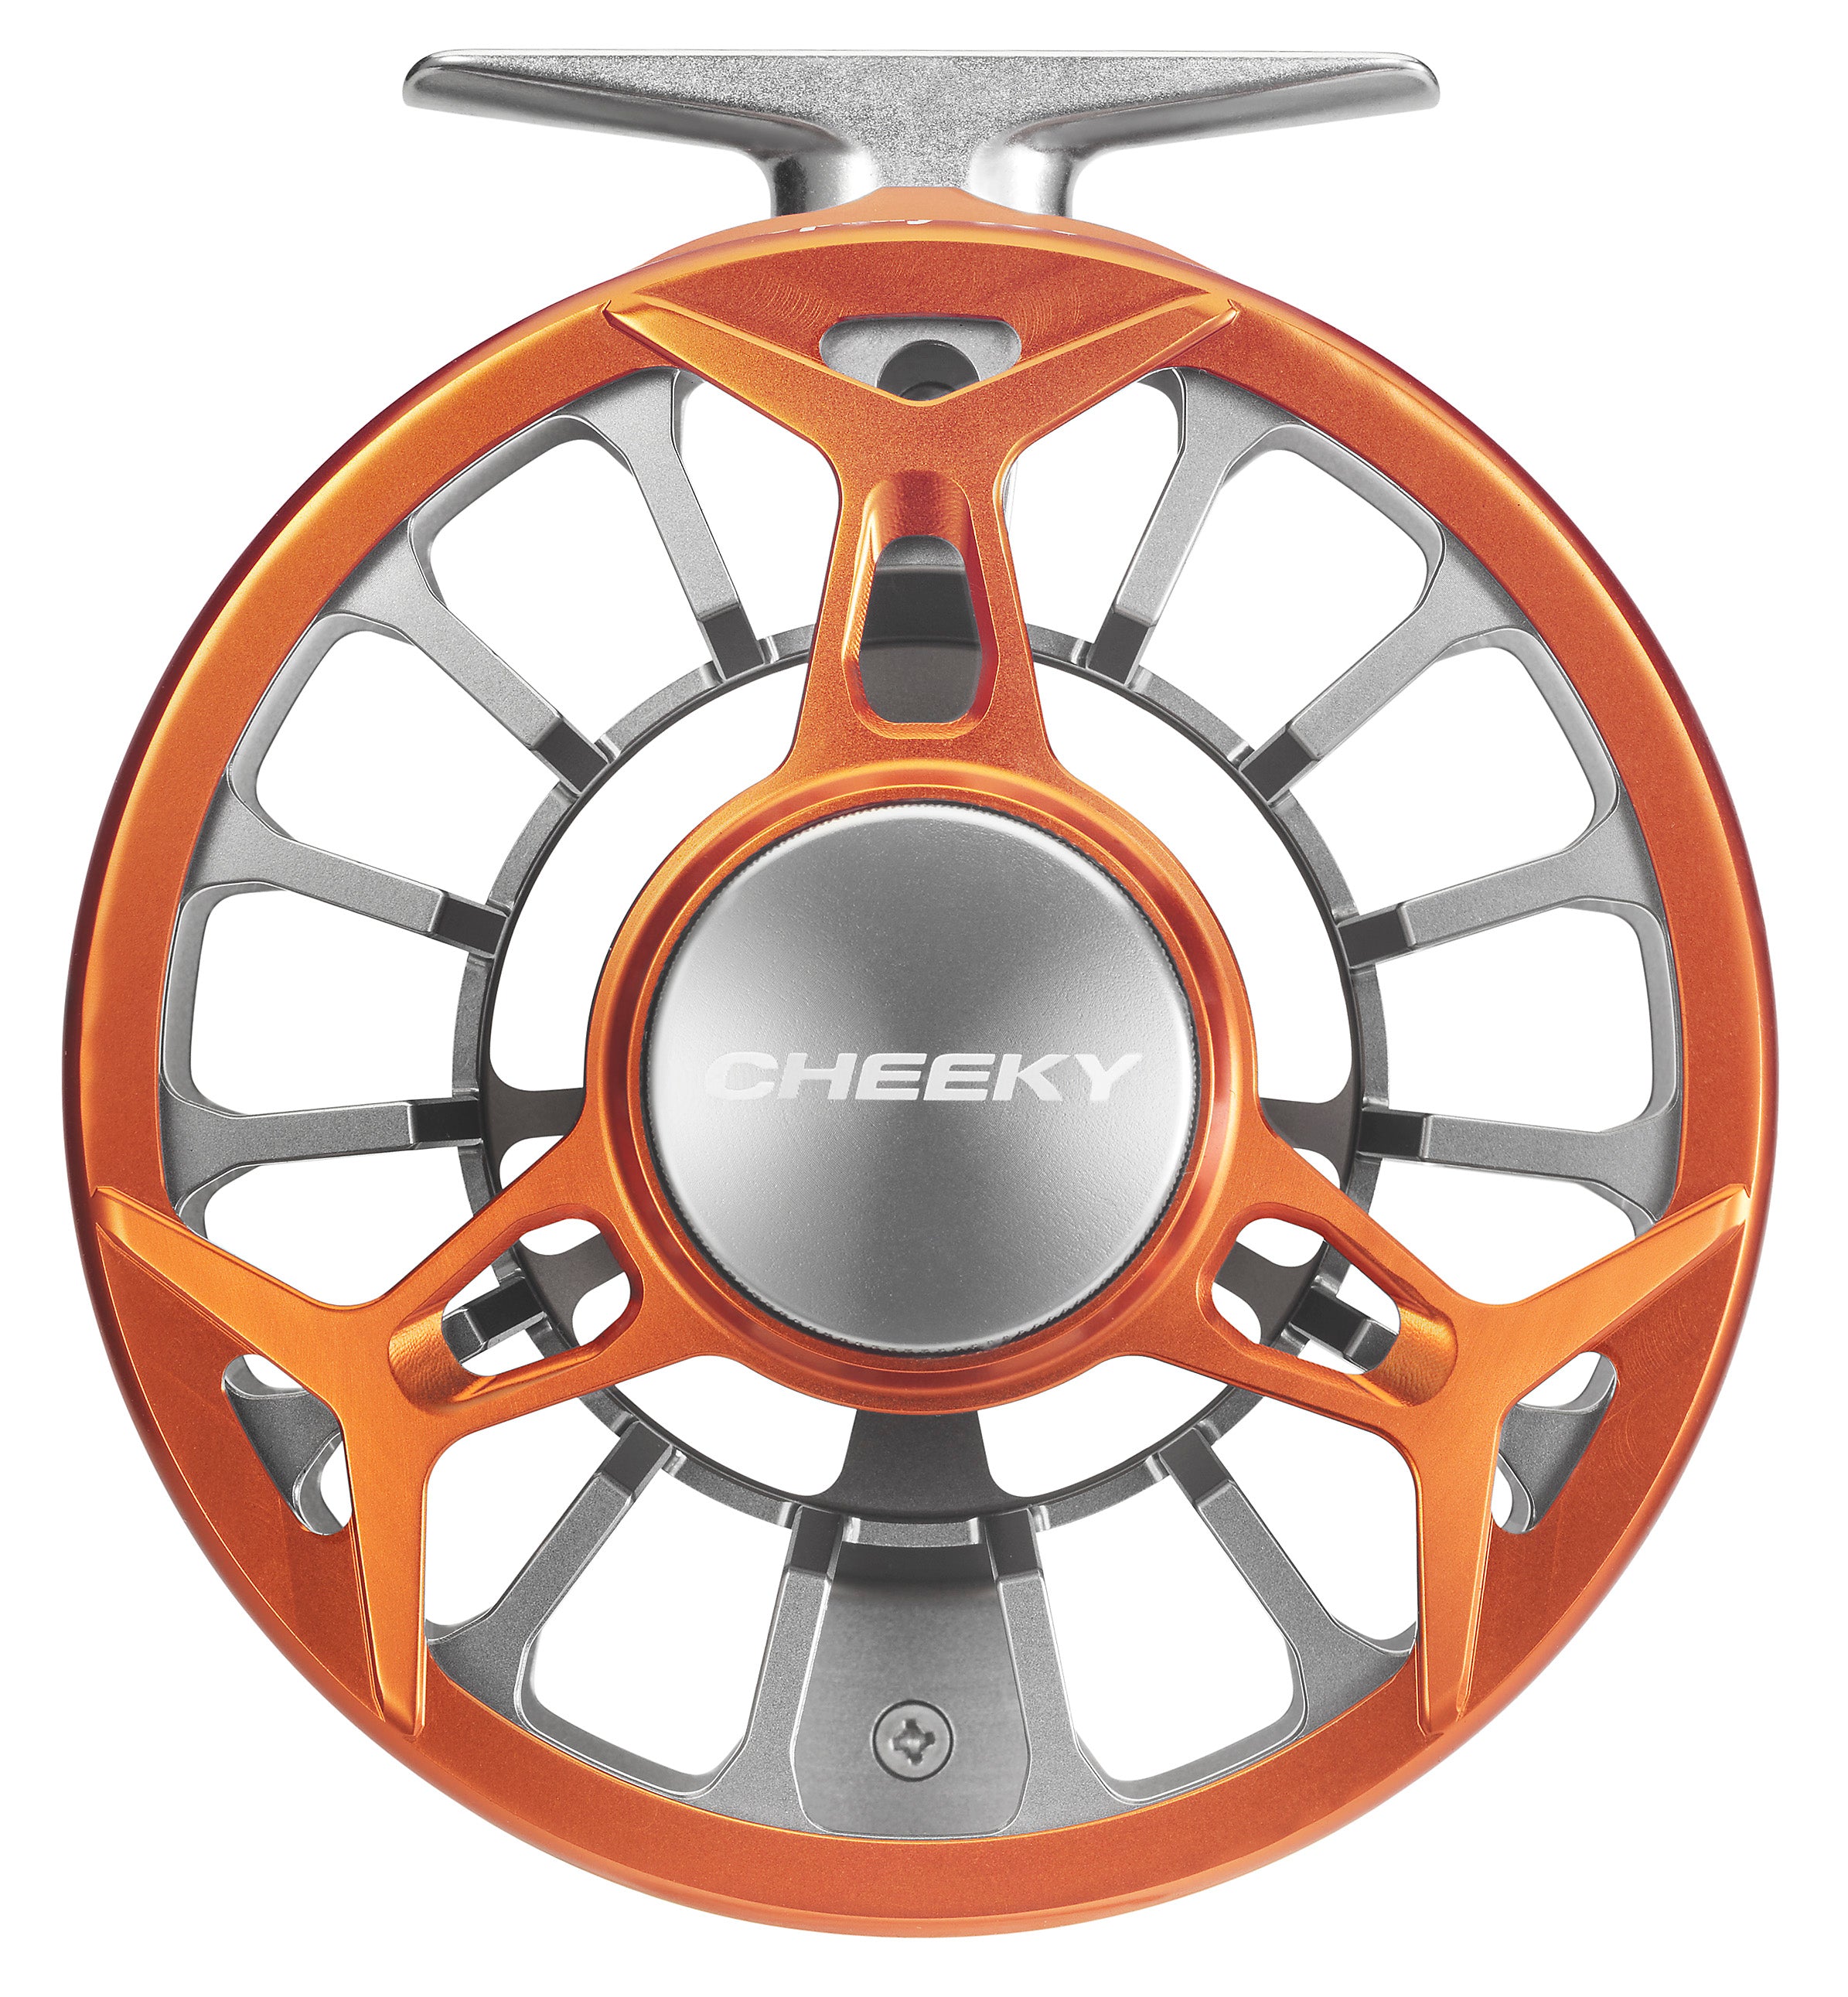 Mirage® LT Extra Fly Spool